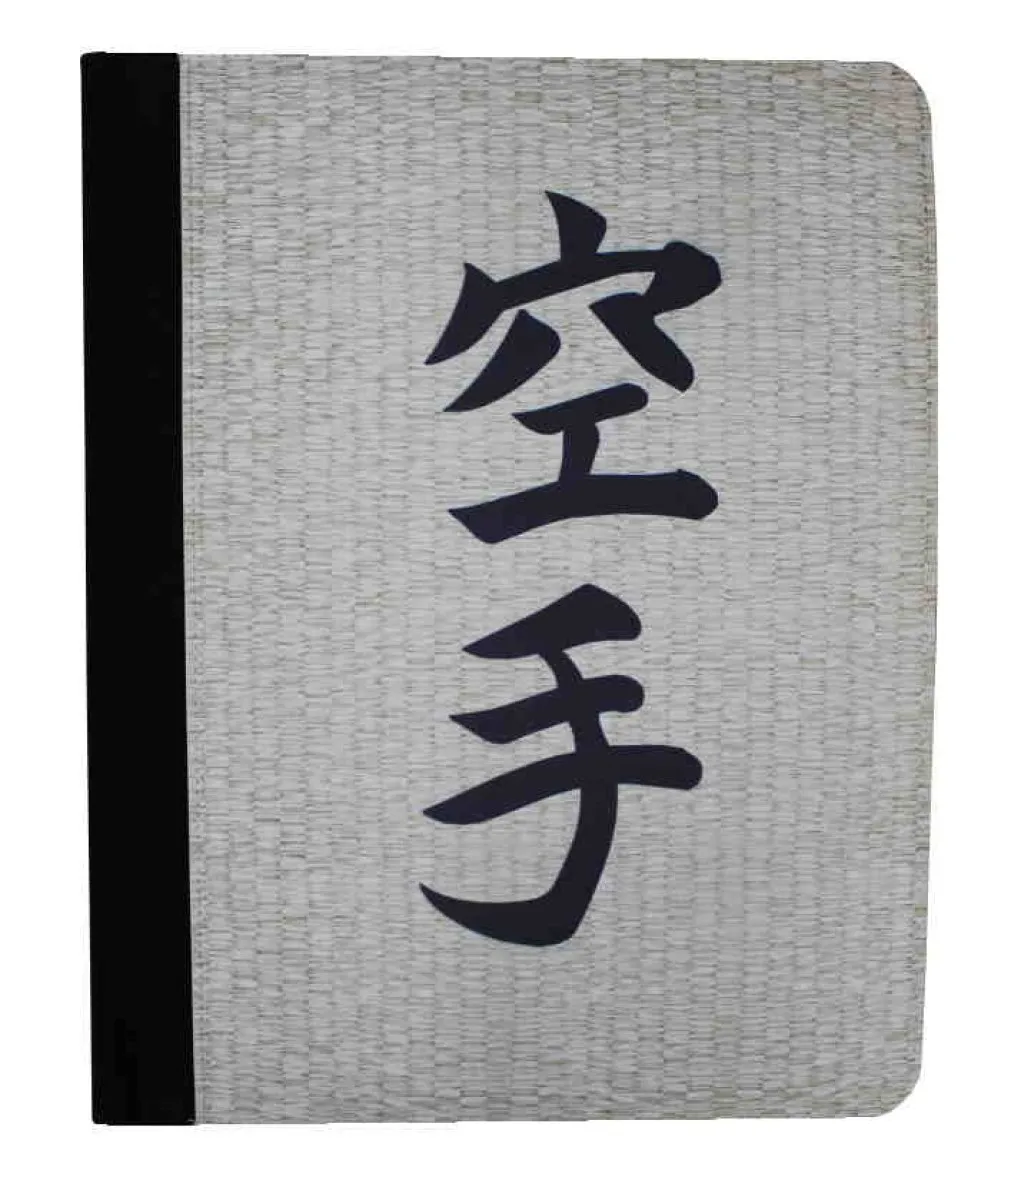 Writing pad with karate characters